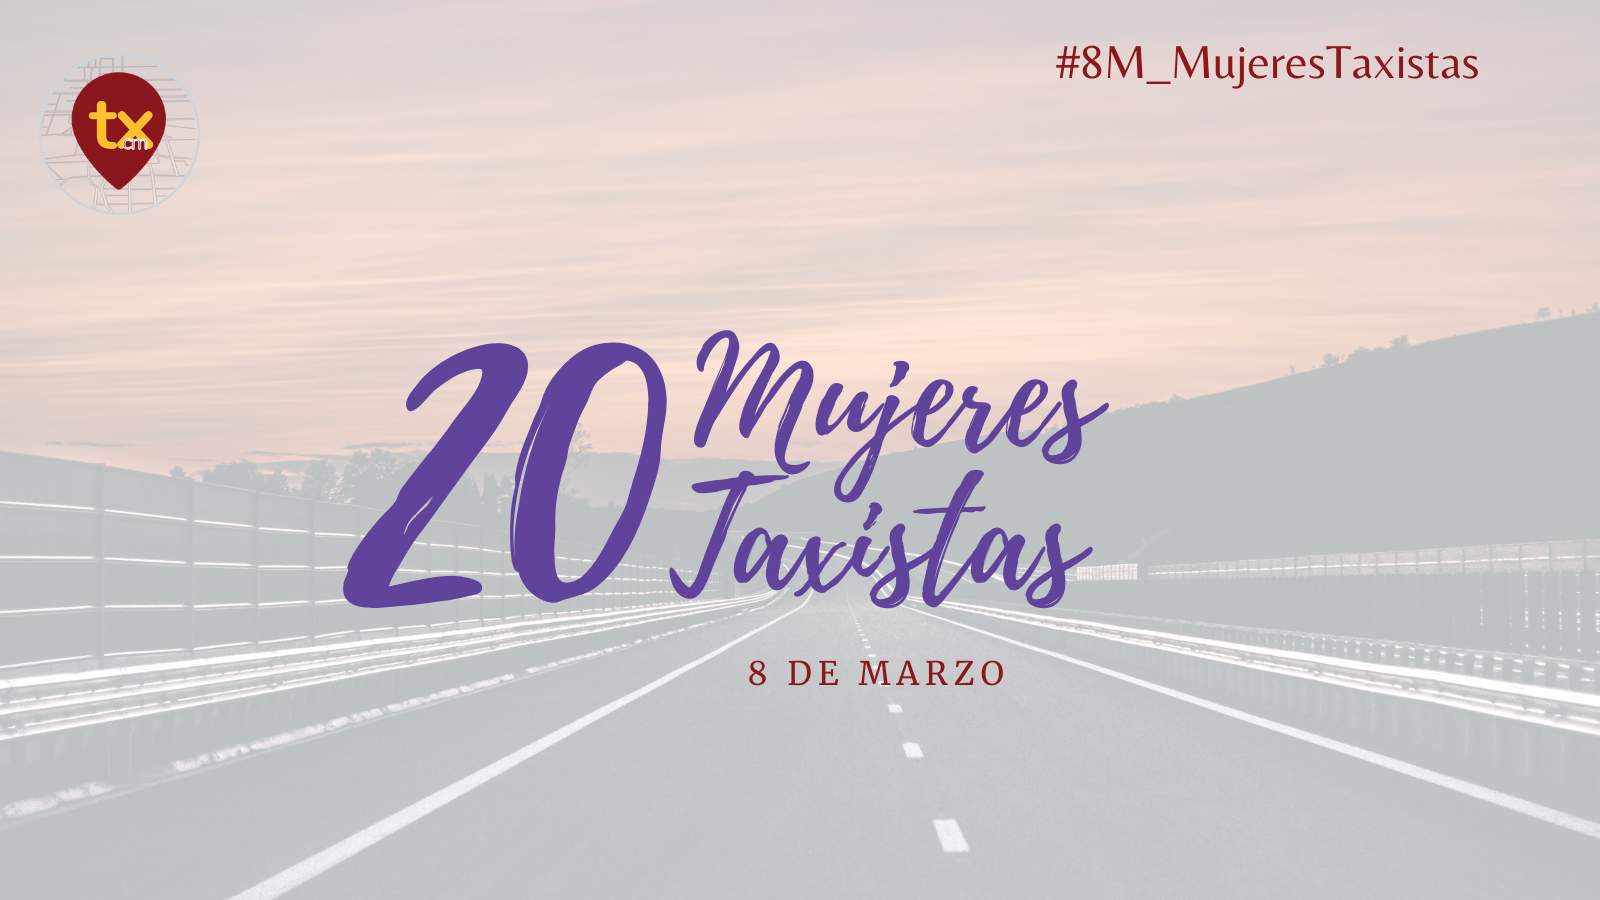 20 Mujeres Taxistas